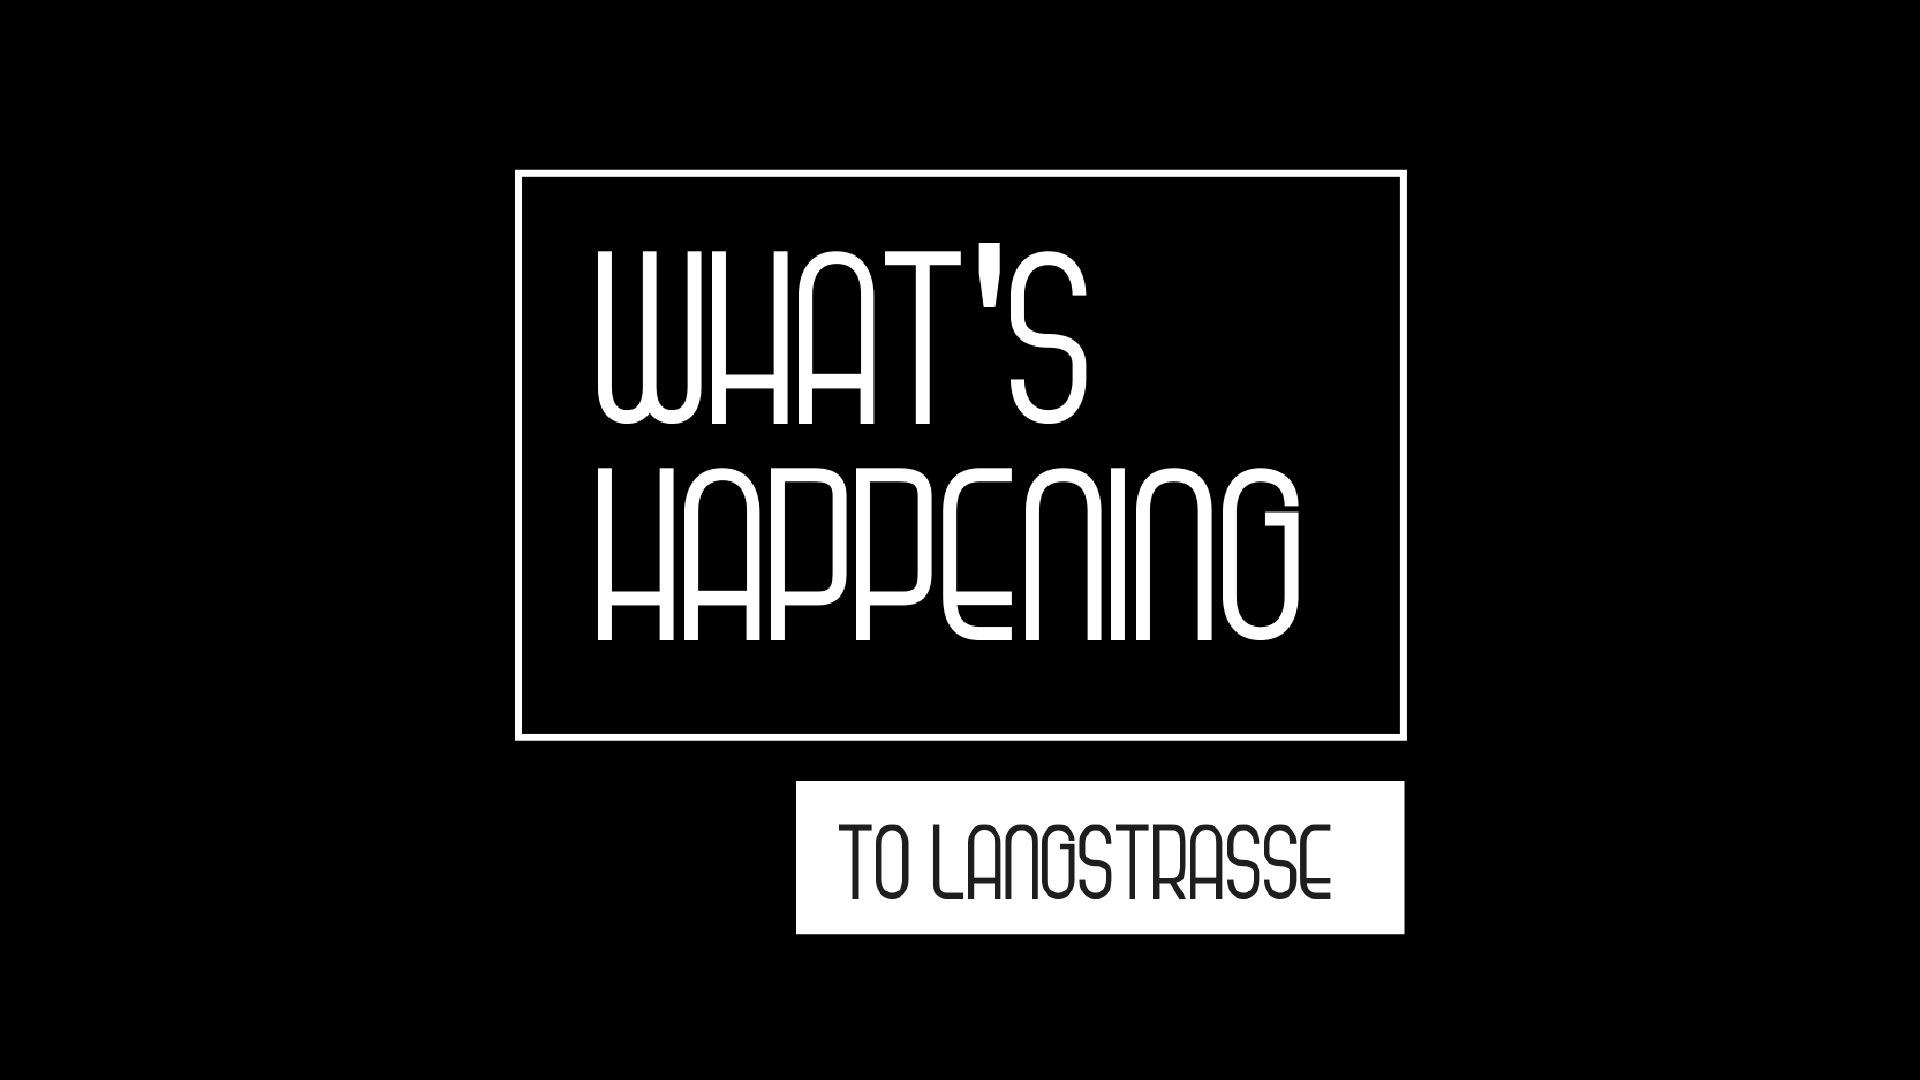 What's happening (to Langstrasse)